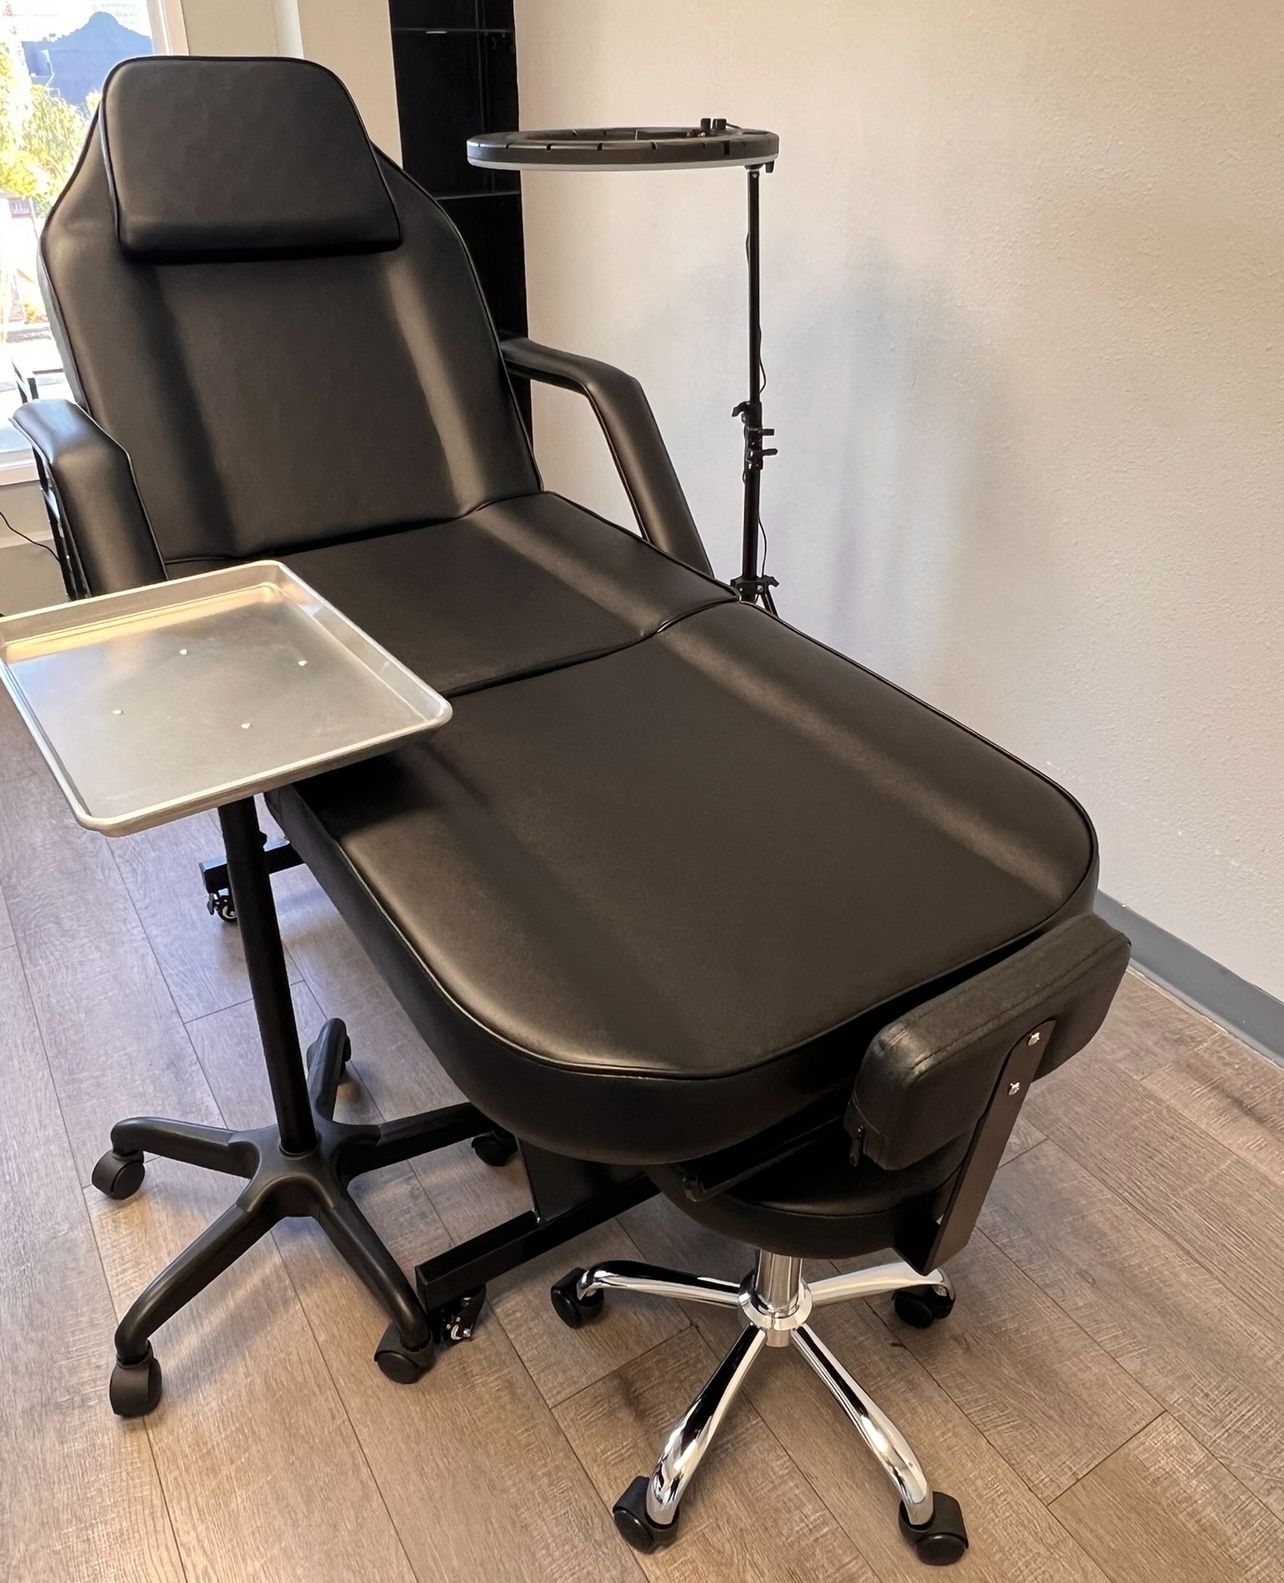 PMU Massage Table Tattoo Esthetician Bed + Chair/Stool : $300 each or best offer. No low ballers.